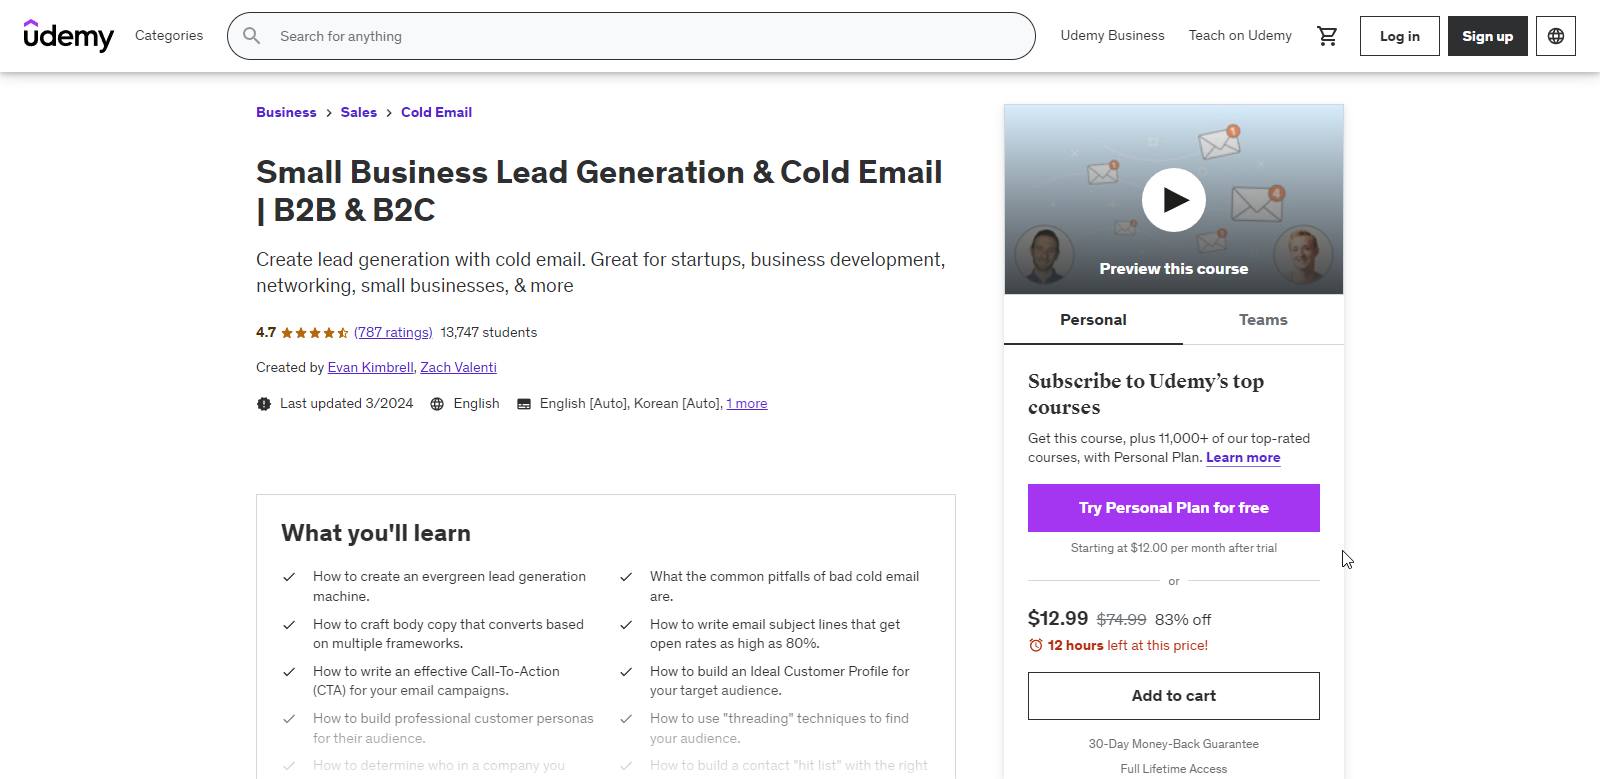 Small business lead generation and cold email _ Udemy